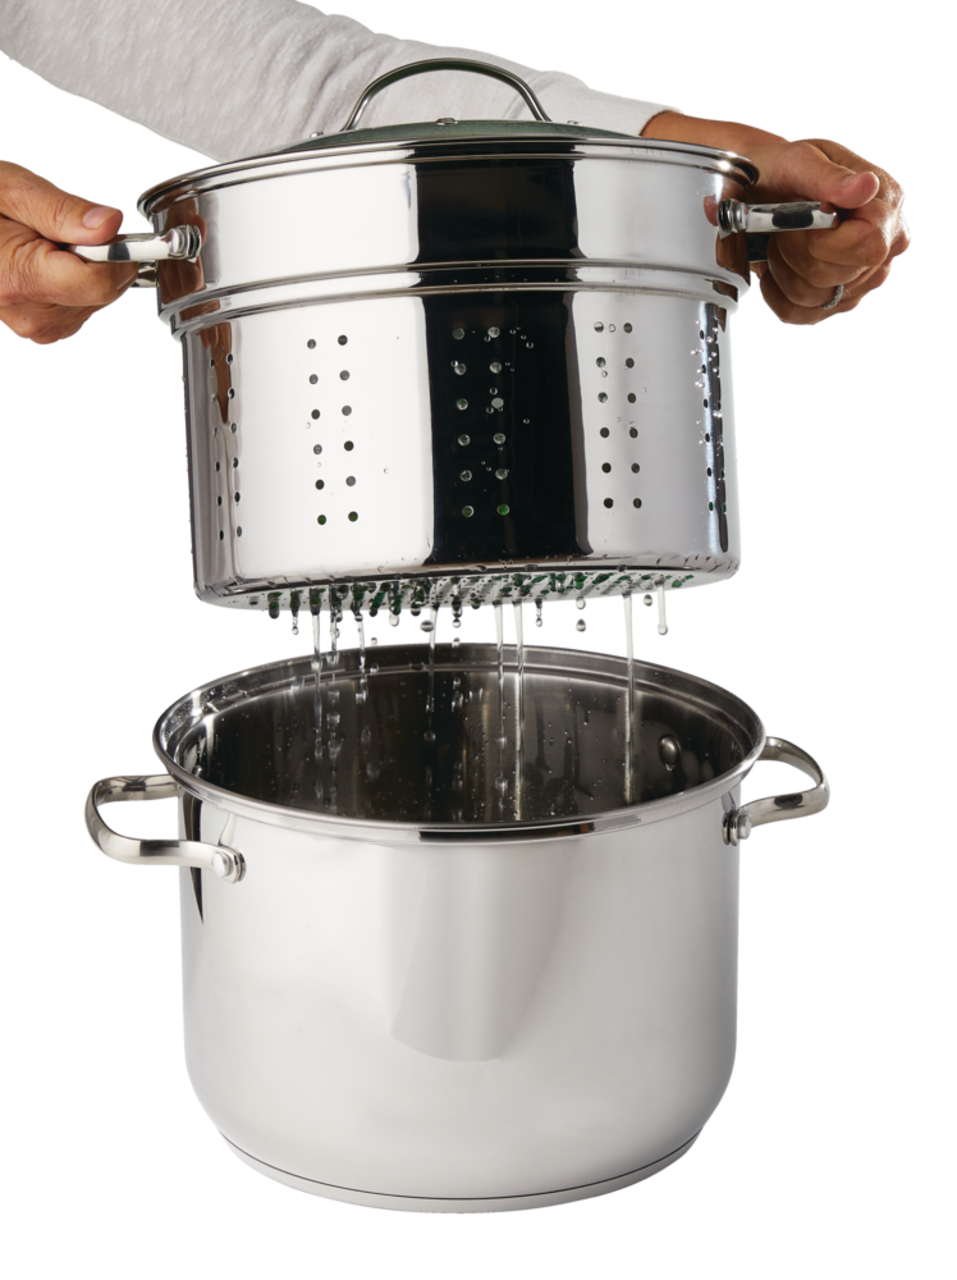 https://media-www.canadiantire.ca/product/living/kitchen/cookware/1429106/master-chef-8qt-4-piece-pasta-pot-0b3b08f3-811a-49f3-a382-ac96760a266b.png?imdensity=1&imwidth=640&impolicy=mZoom